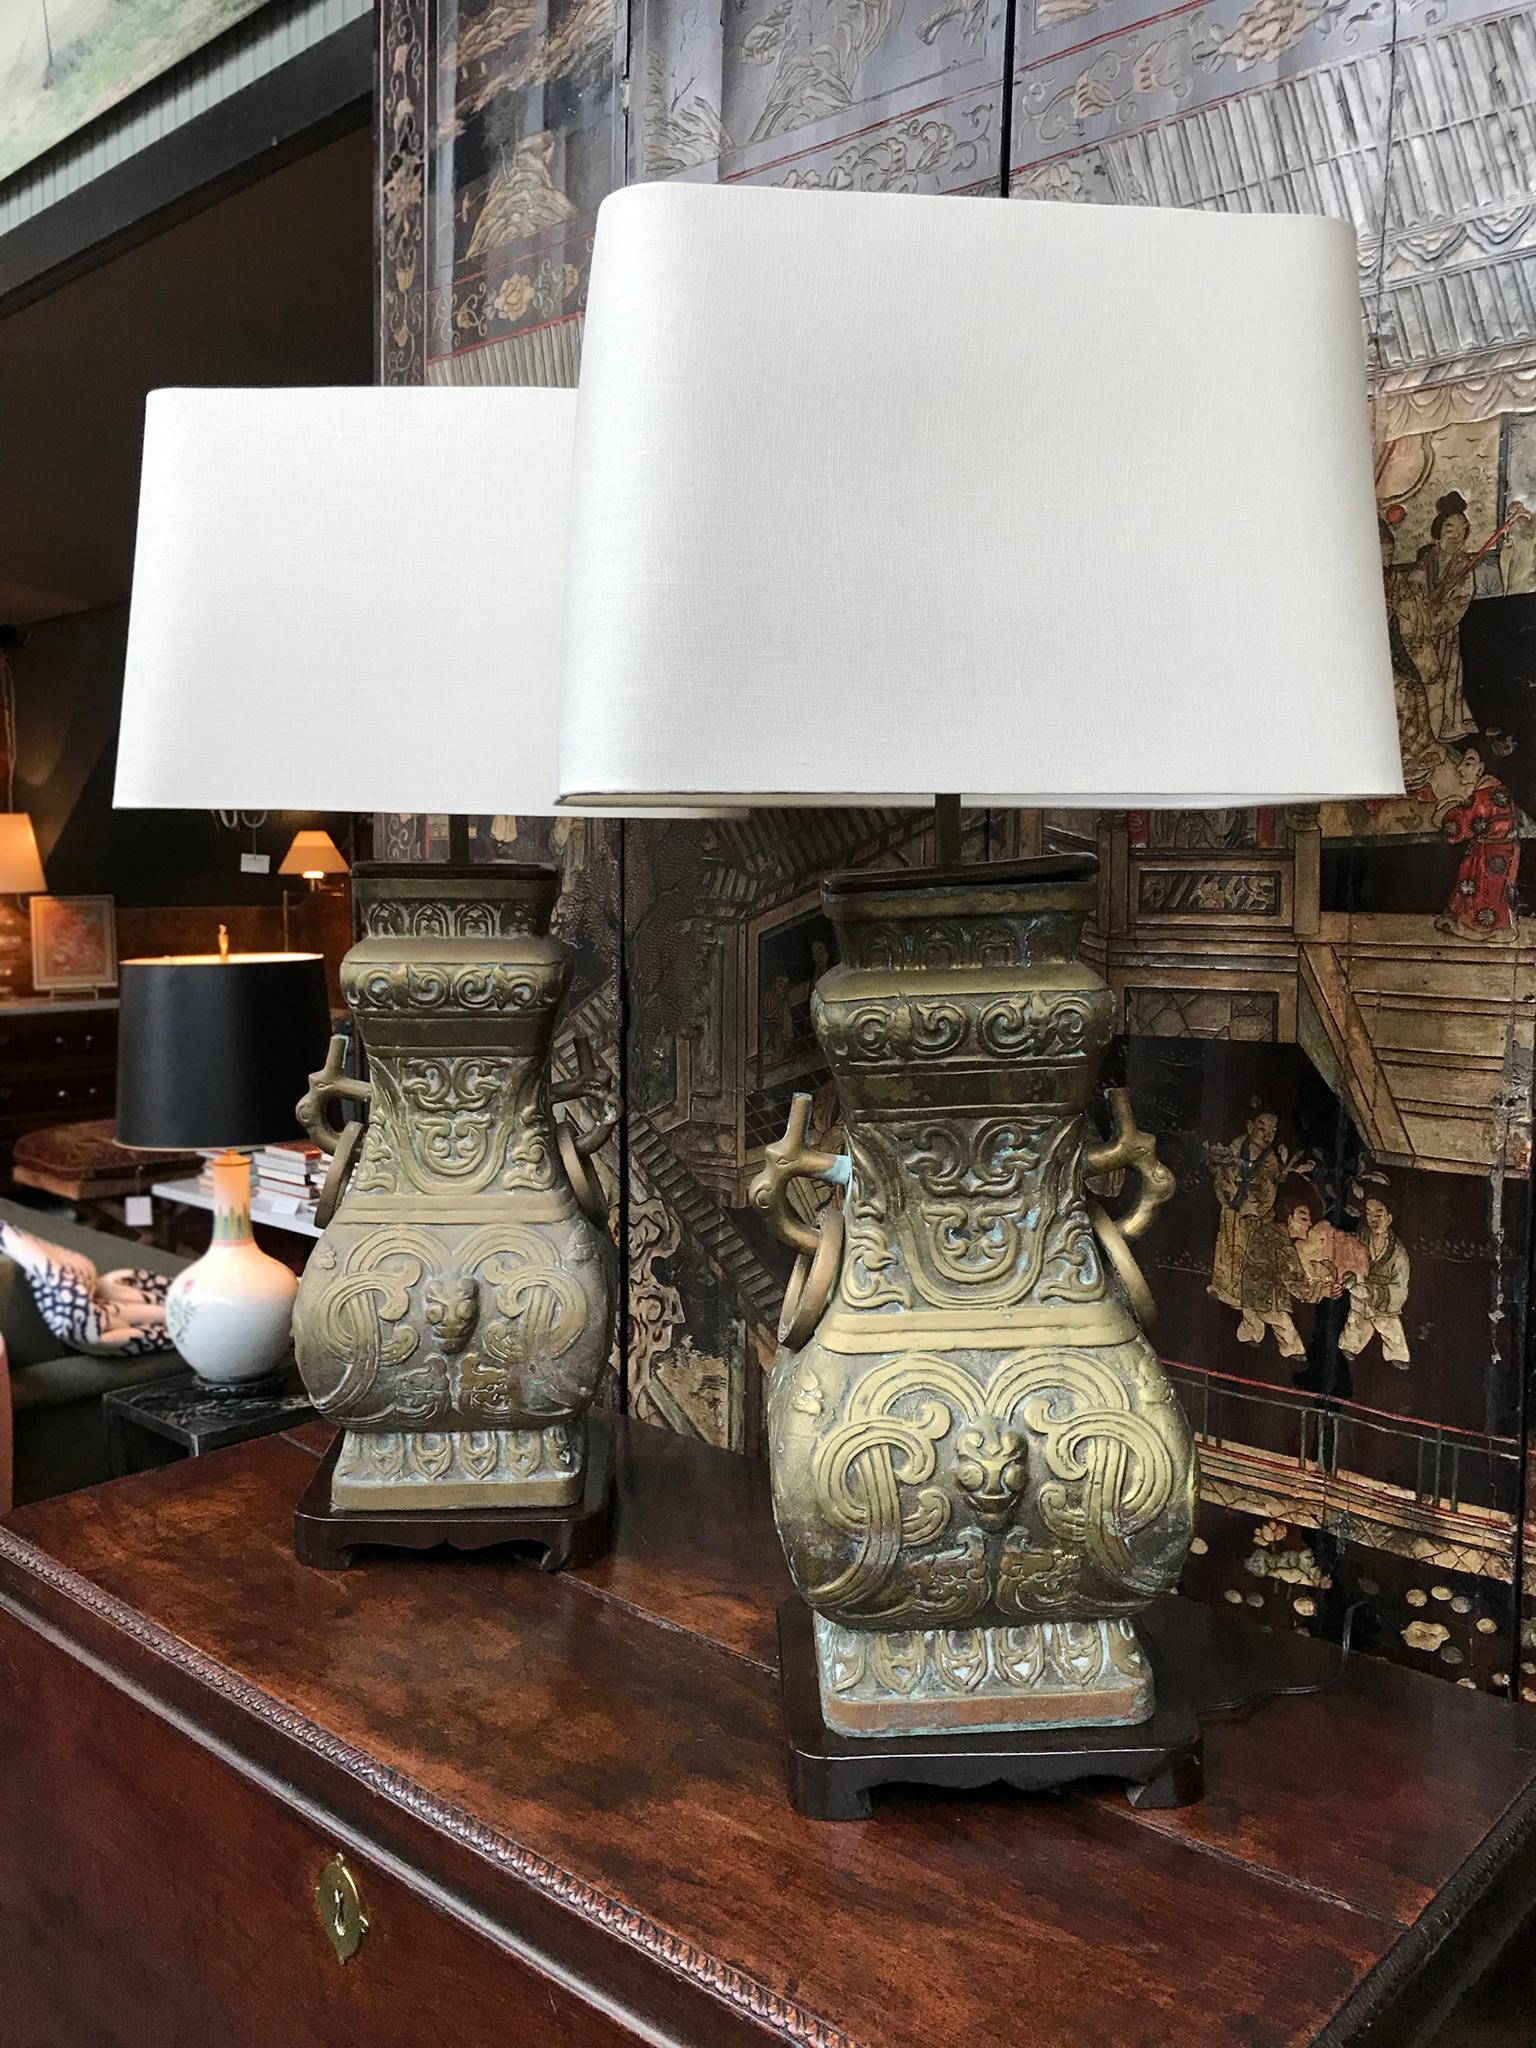 A remarkable pair of large brass table lamps in the manner of James Mont. Manufactured circa 1940s-1950s. Like Mont's creations, these lamps bring together various stylistic movements in their design. They are comprised of cast brass embossed with